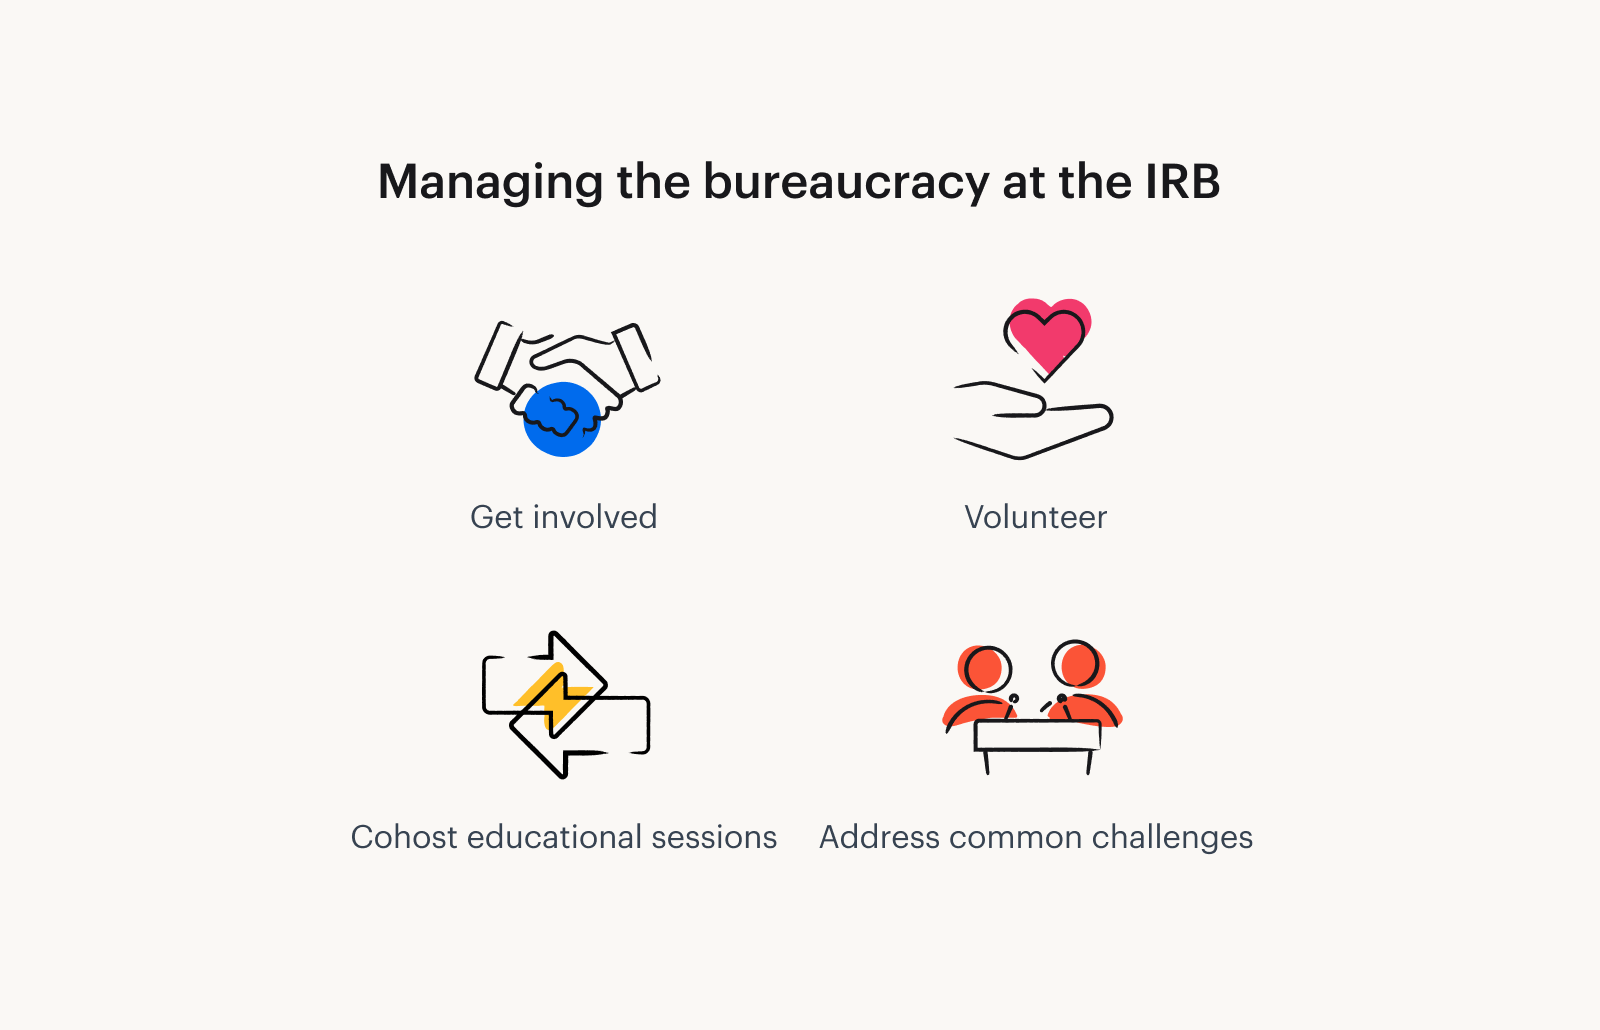 To manage bureaucracy at the IRB, get involved, volunteer, cohost educational sessions, and address common challenges alongside the organization.